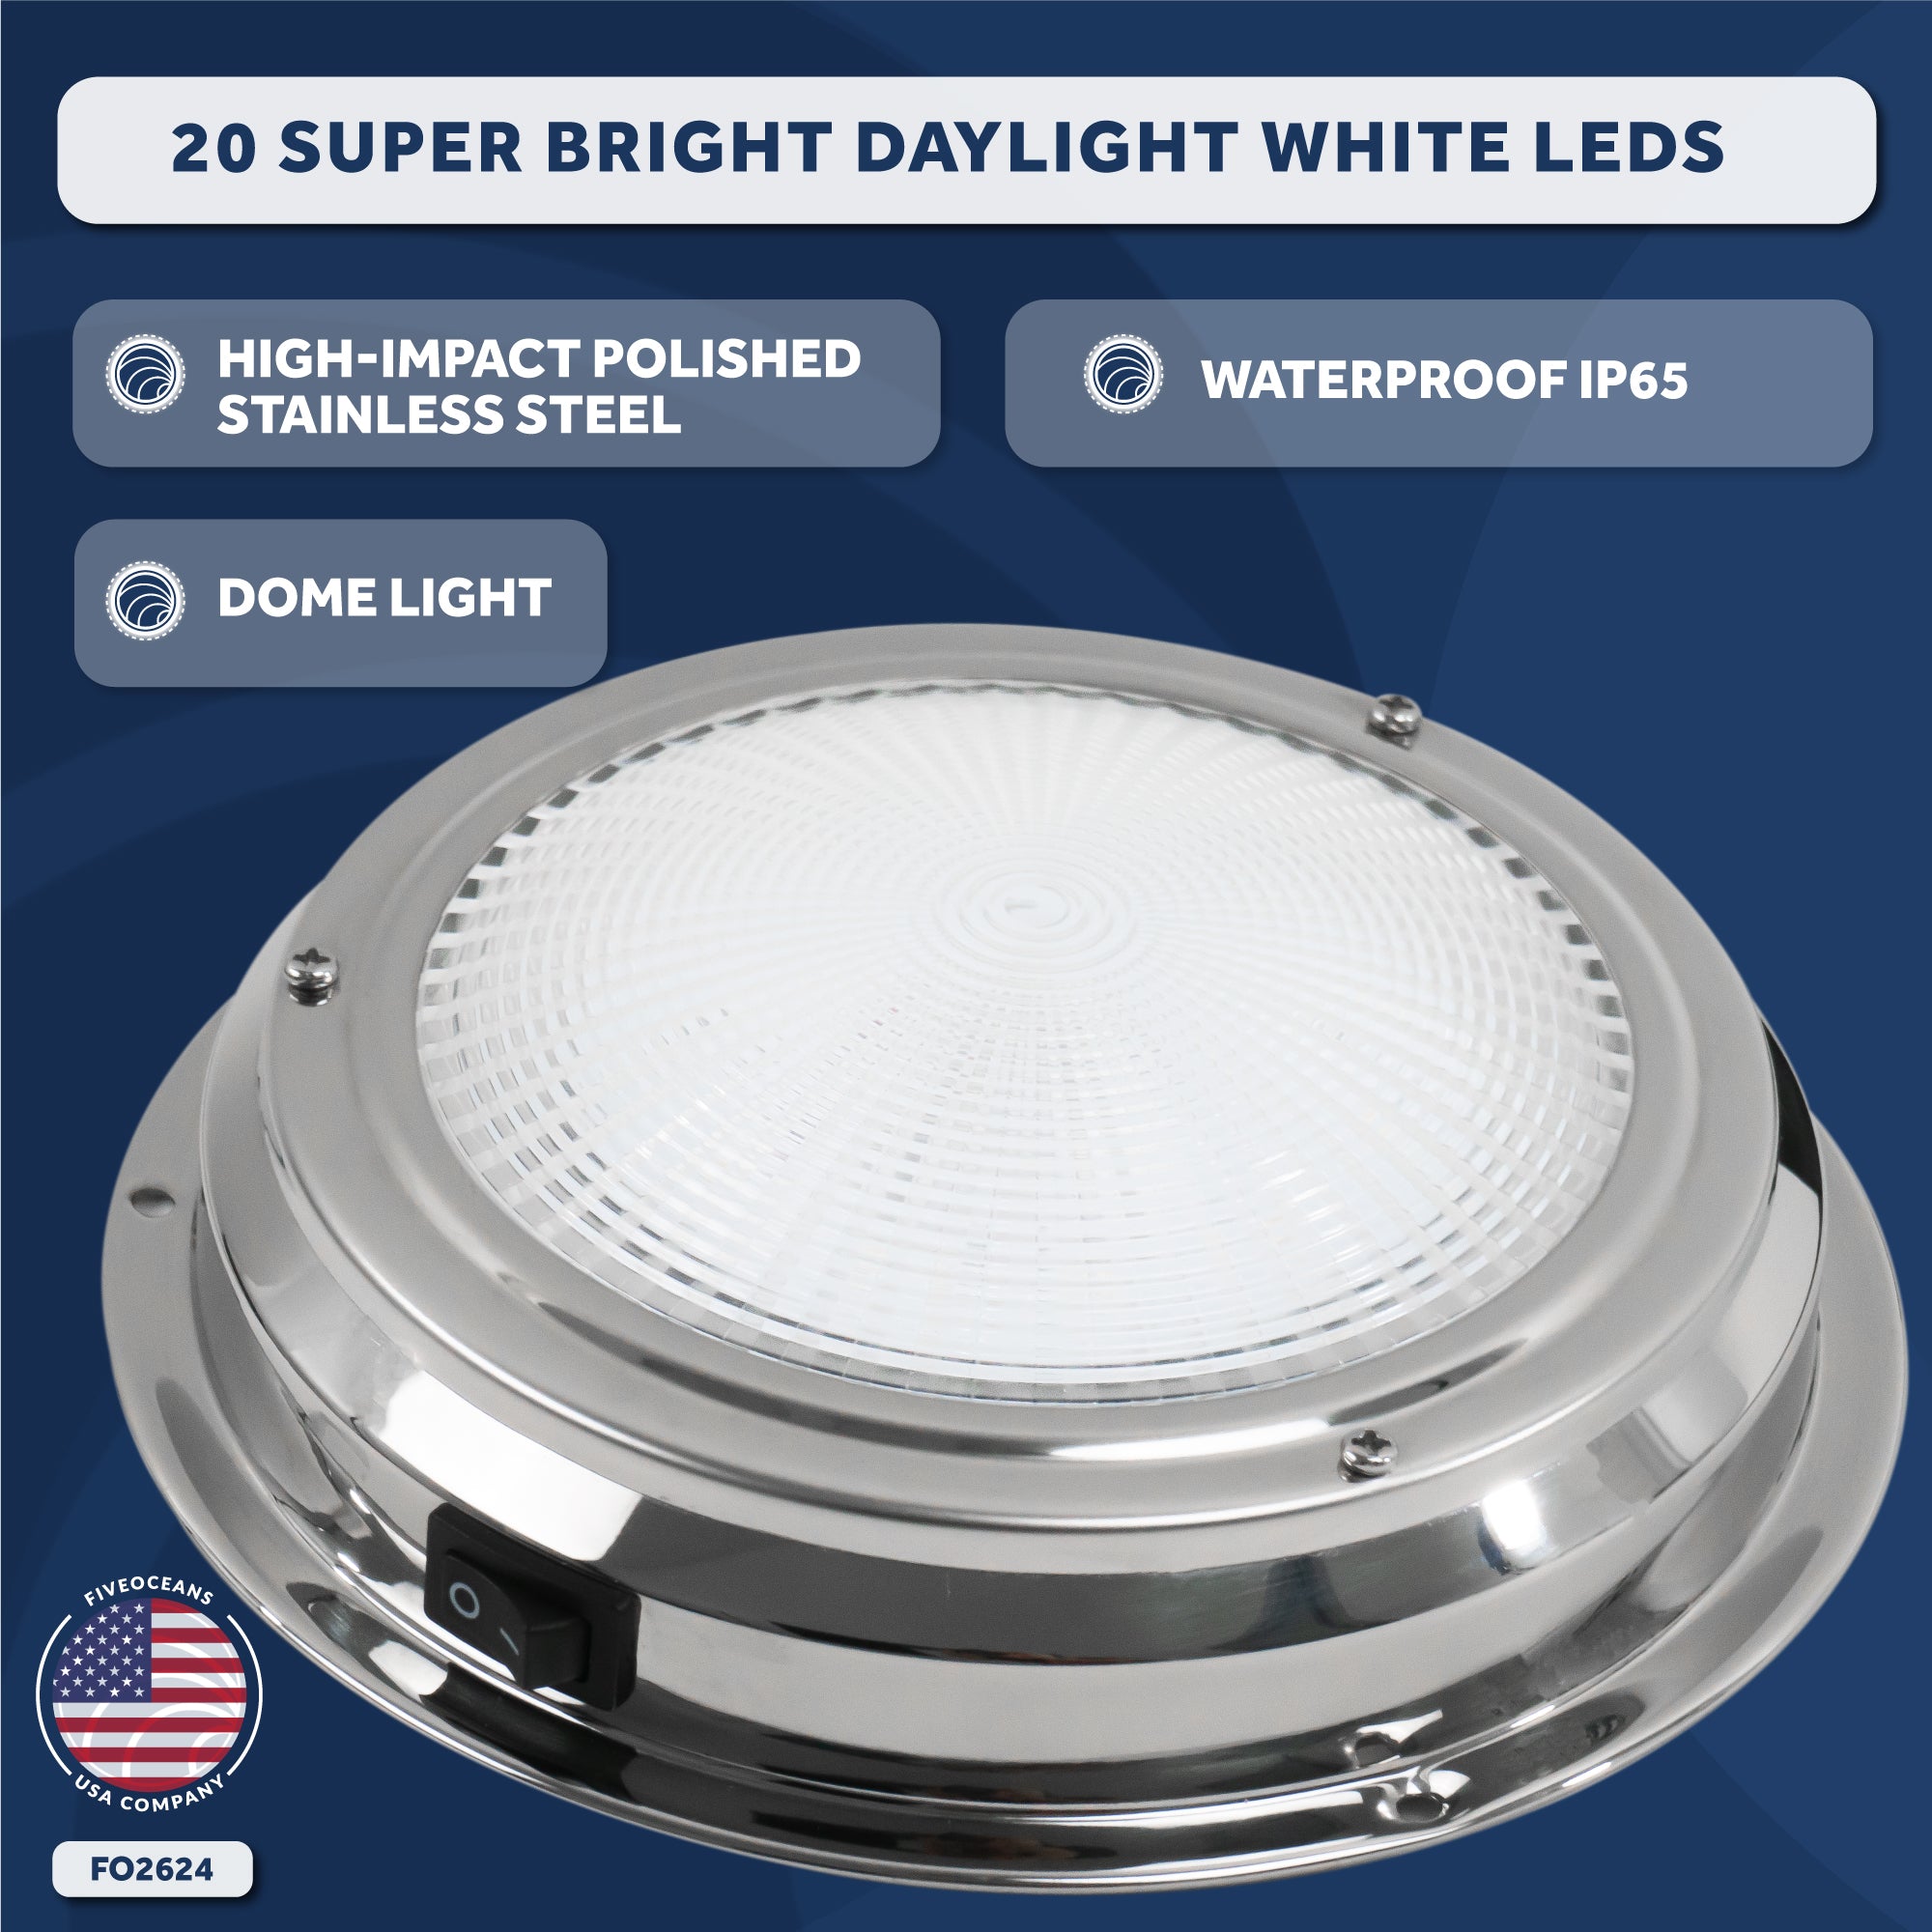 LED Interior Dome Ceiling Light, 4" Surface Mount, Daylight White - FO2624